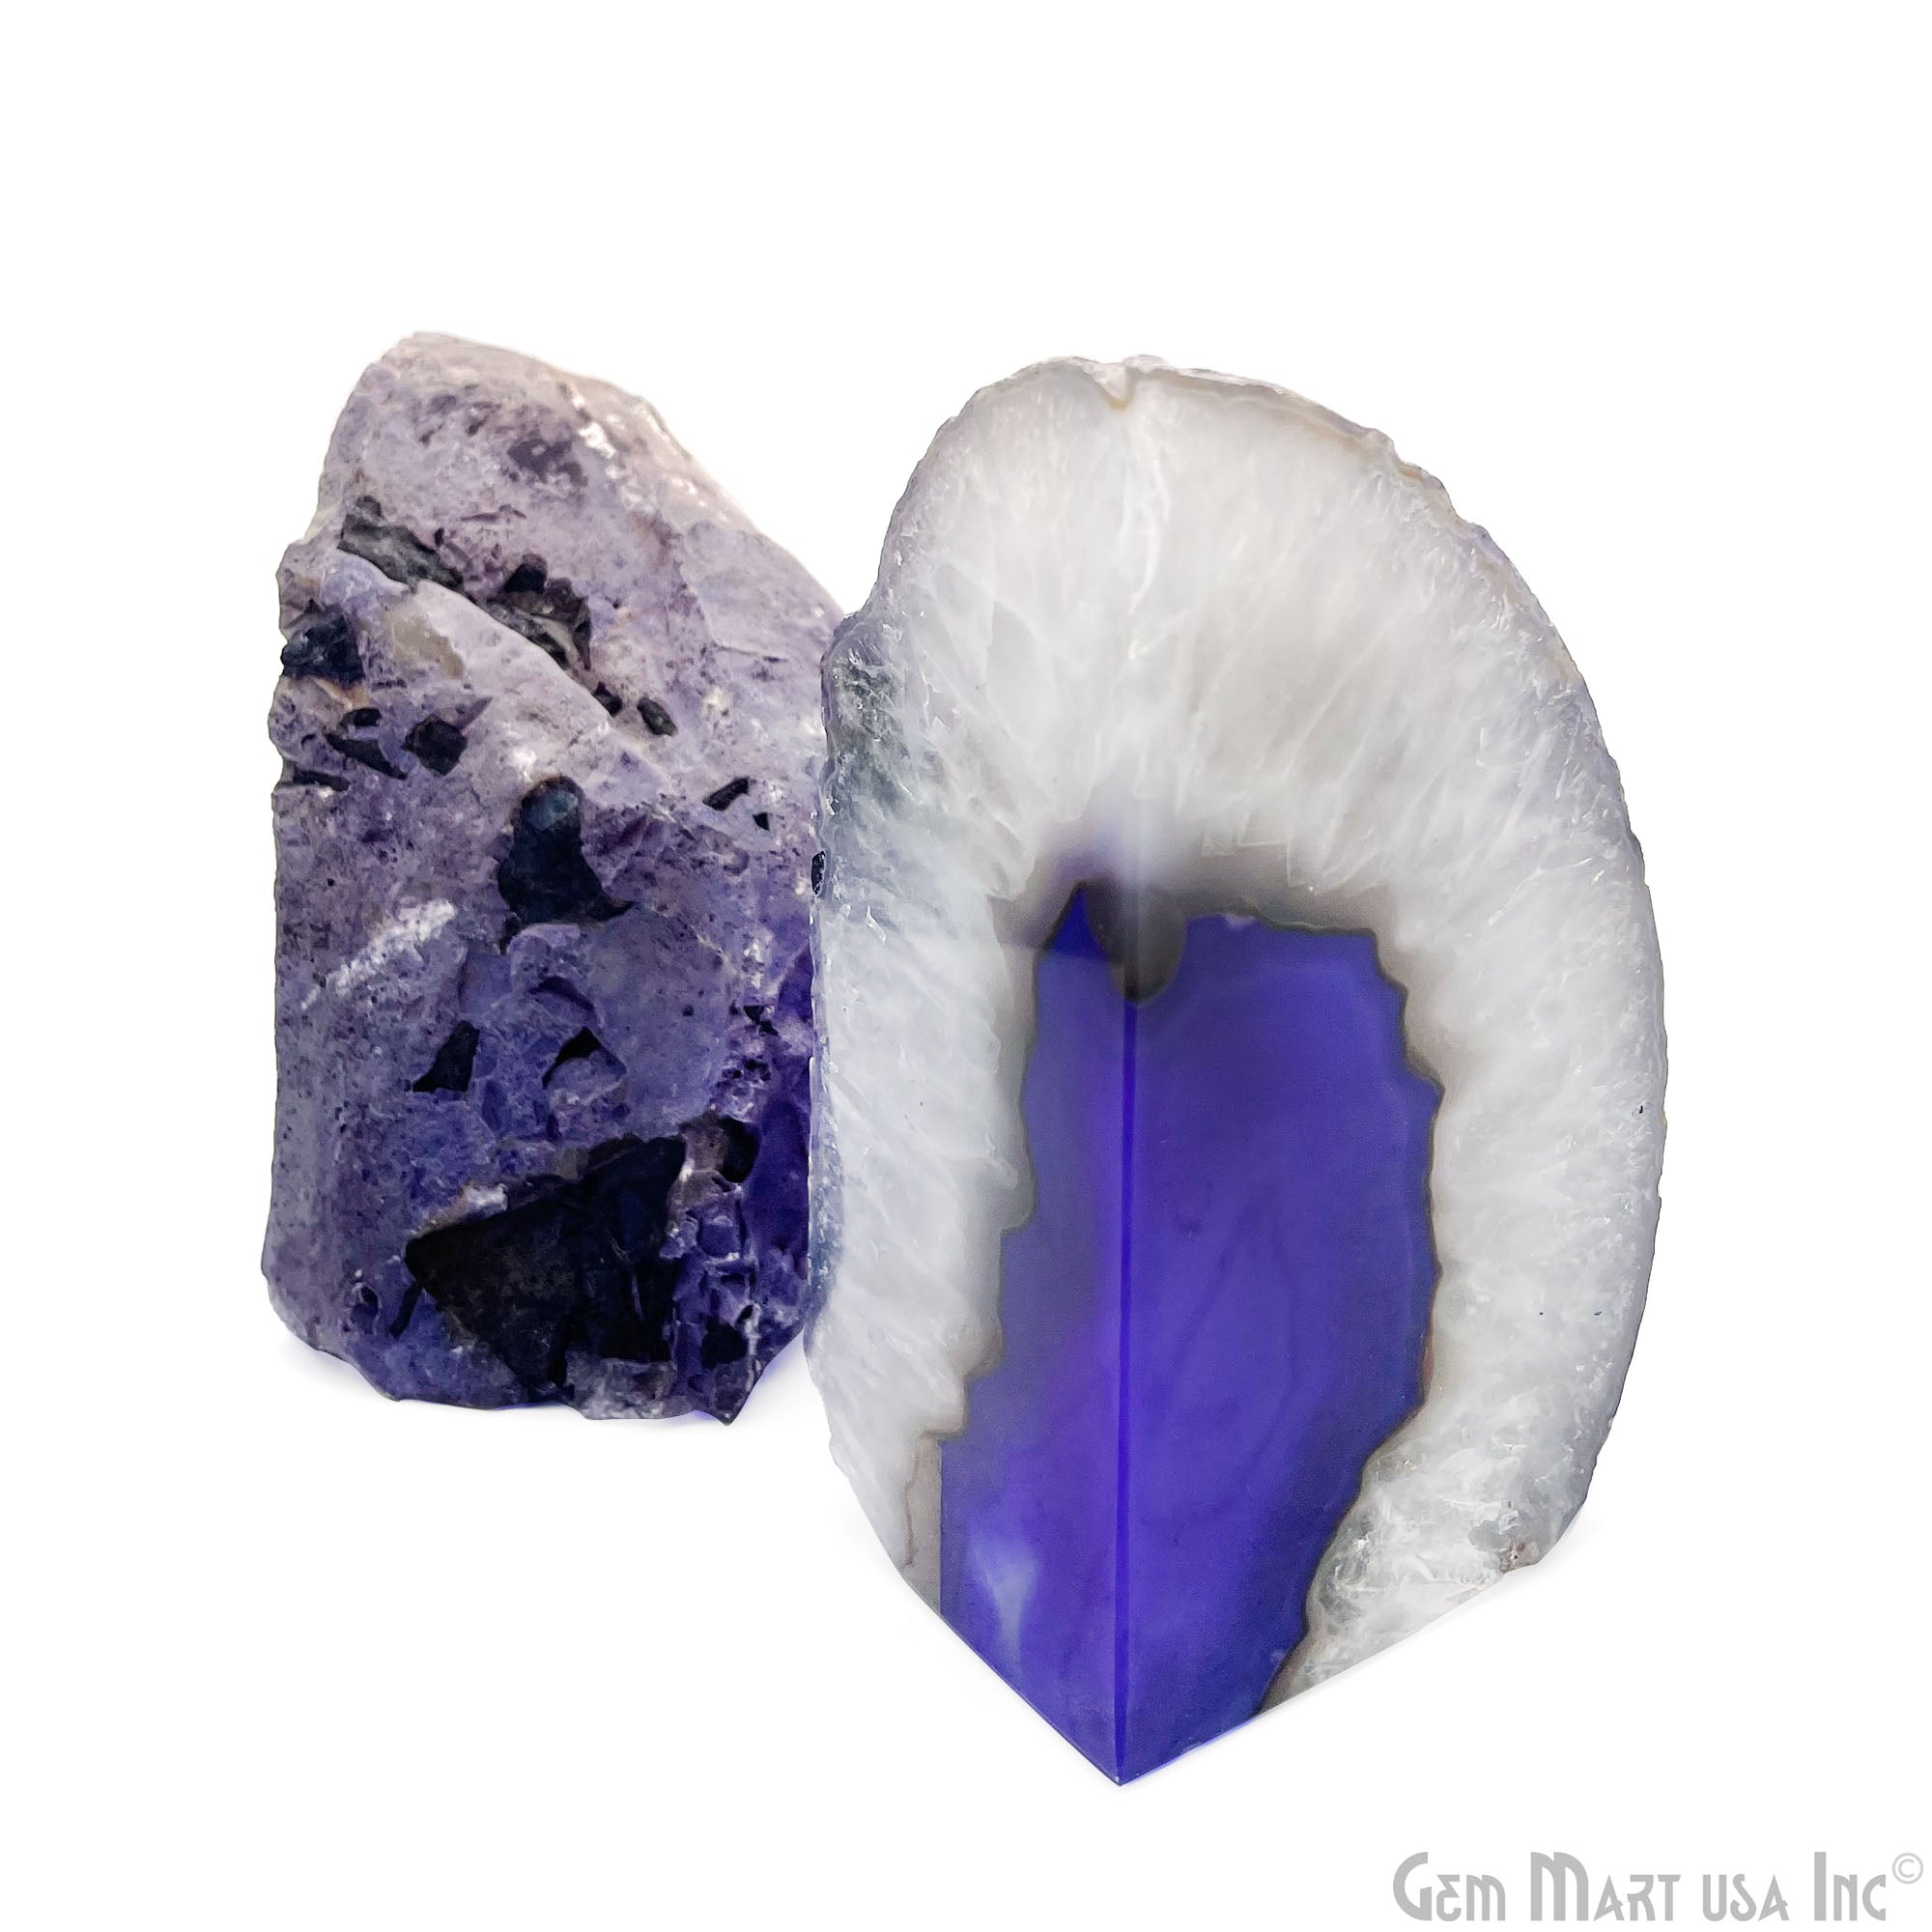 Large Geode Bookend. Purple Agate Bookend Pair. (3.8lbs, 5-6inch). Mineral Rock Formation, Healing Energy Crystal, Home Decor. *Ships Free